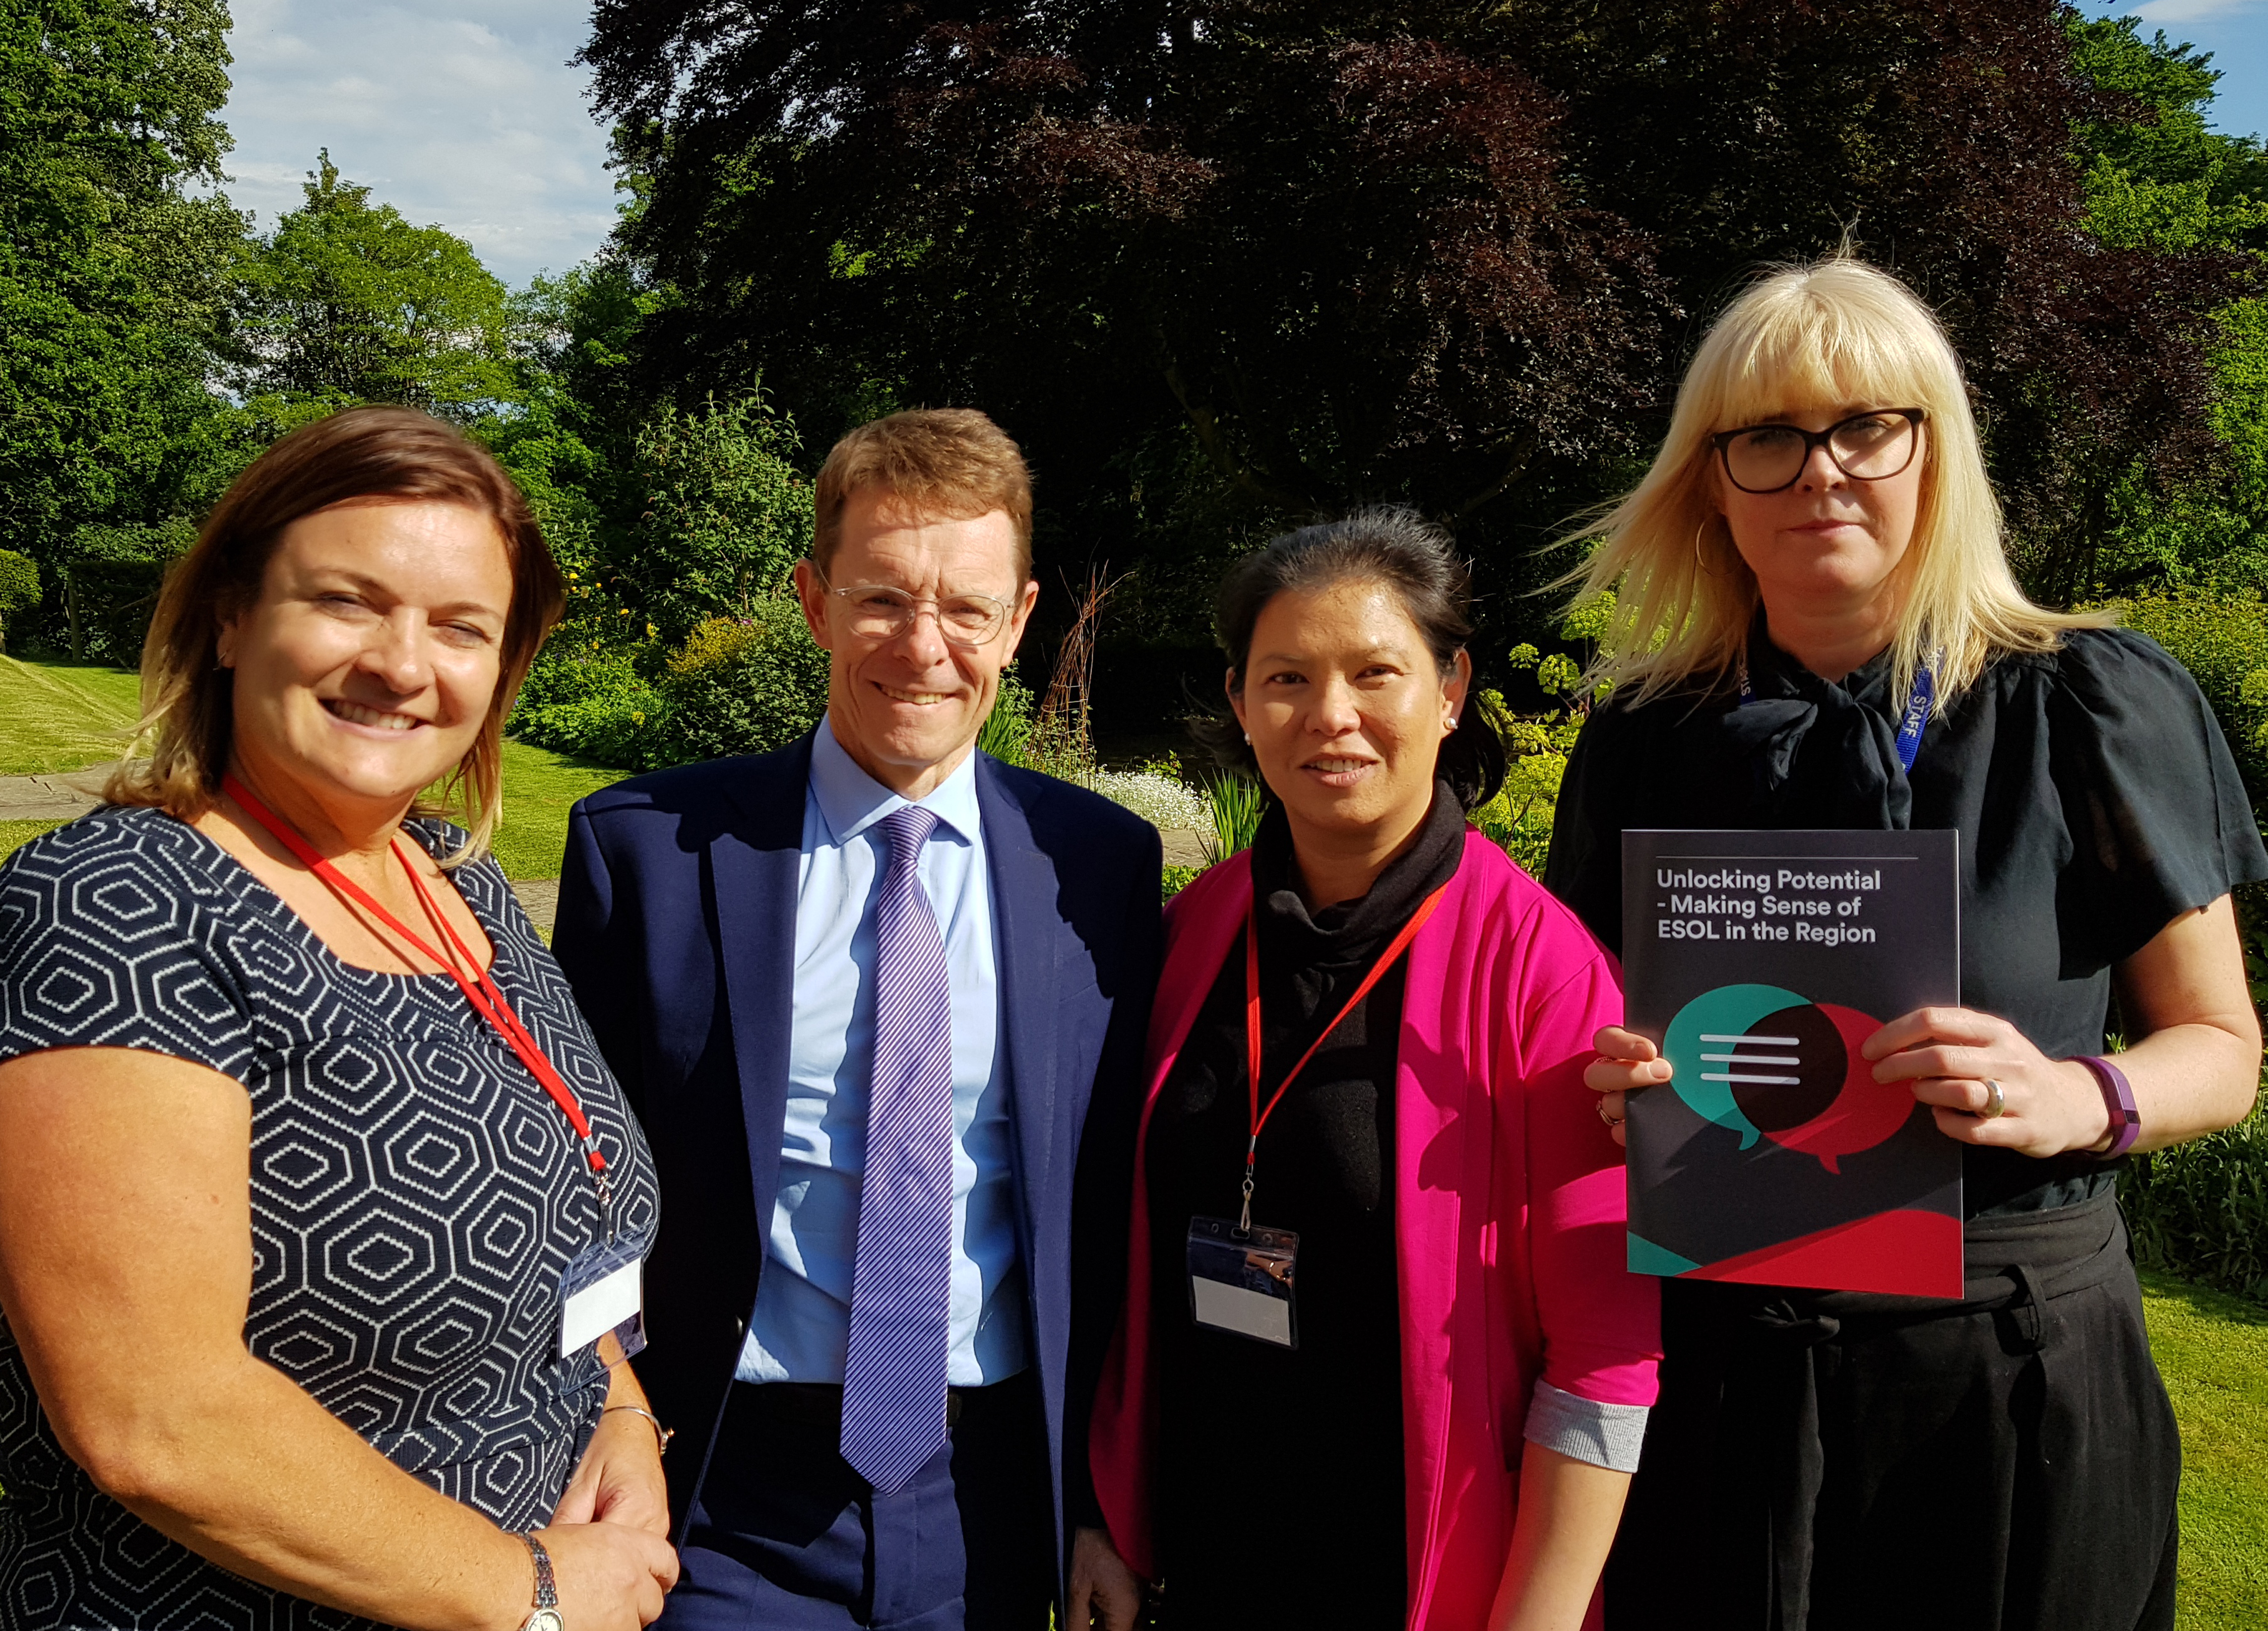 (From left): WMCA head of skills delivery Clare Hatton, Mayor of the West Midlands Andy Street, English as a second language learner Seong Chua from Wolverhampton, and principal and CEO of Fircroft College, Mel Lenehan, at the launch of the Unlocking Potential report